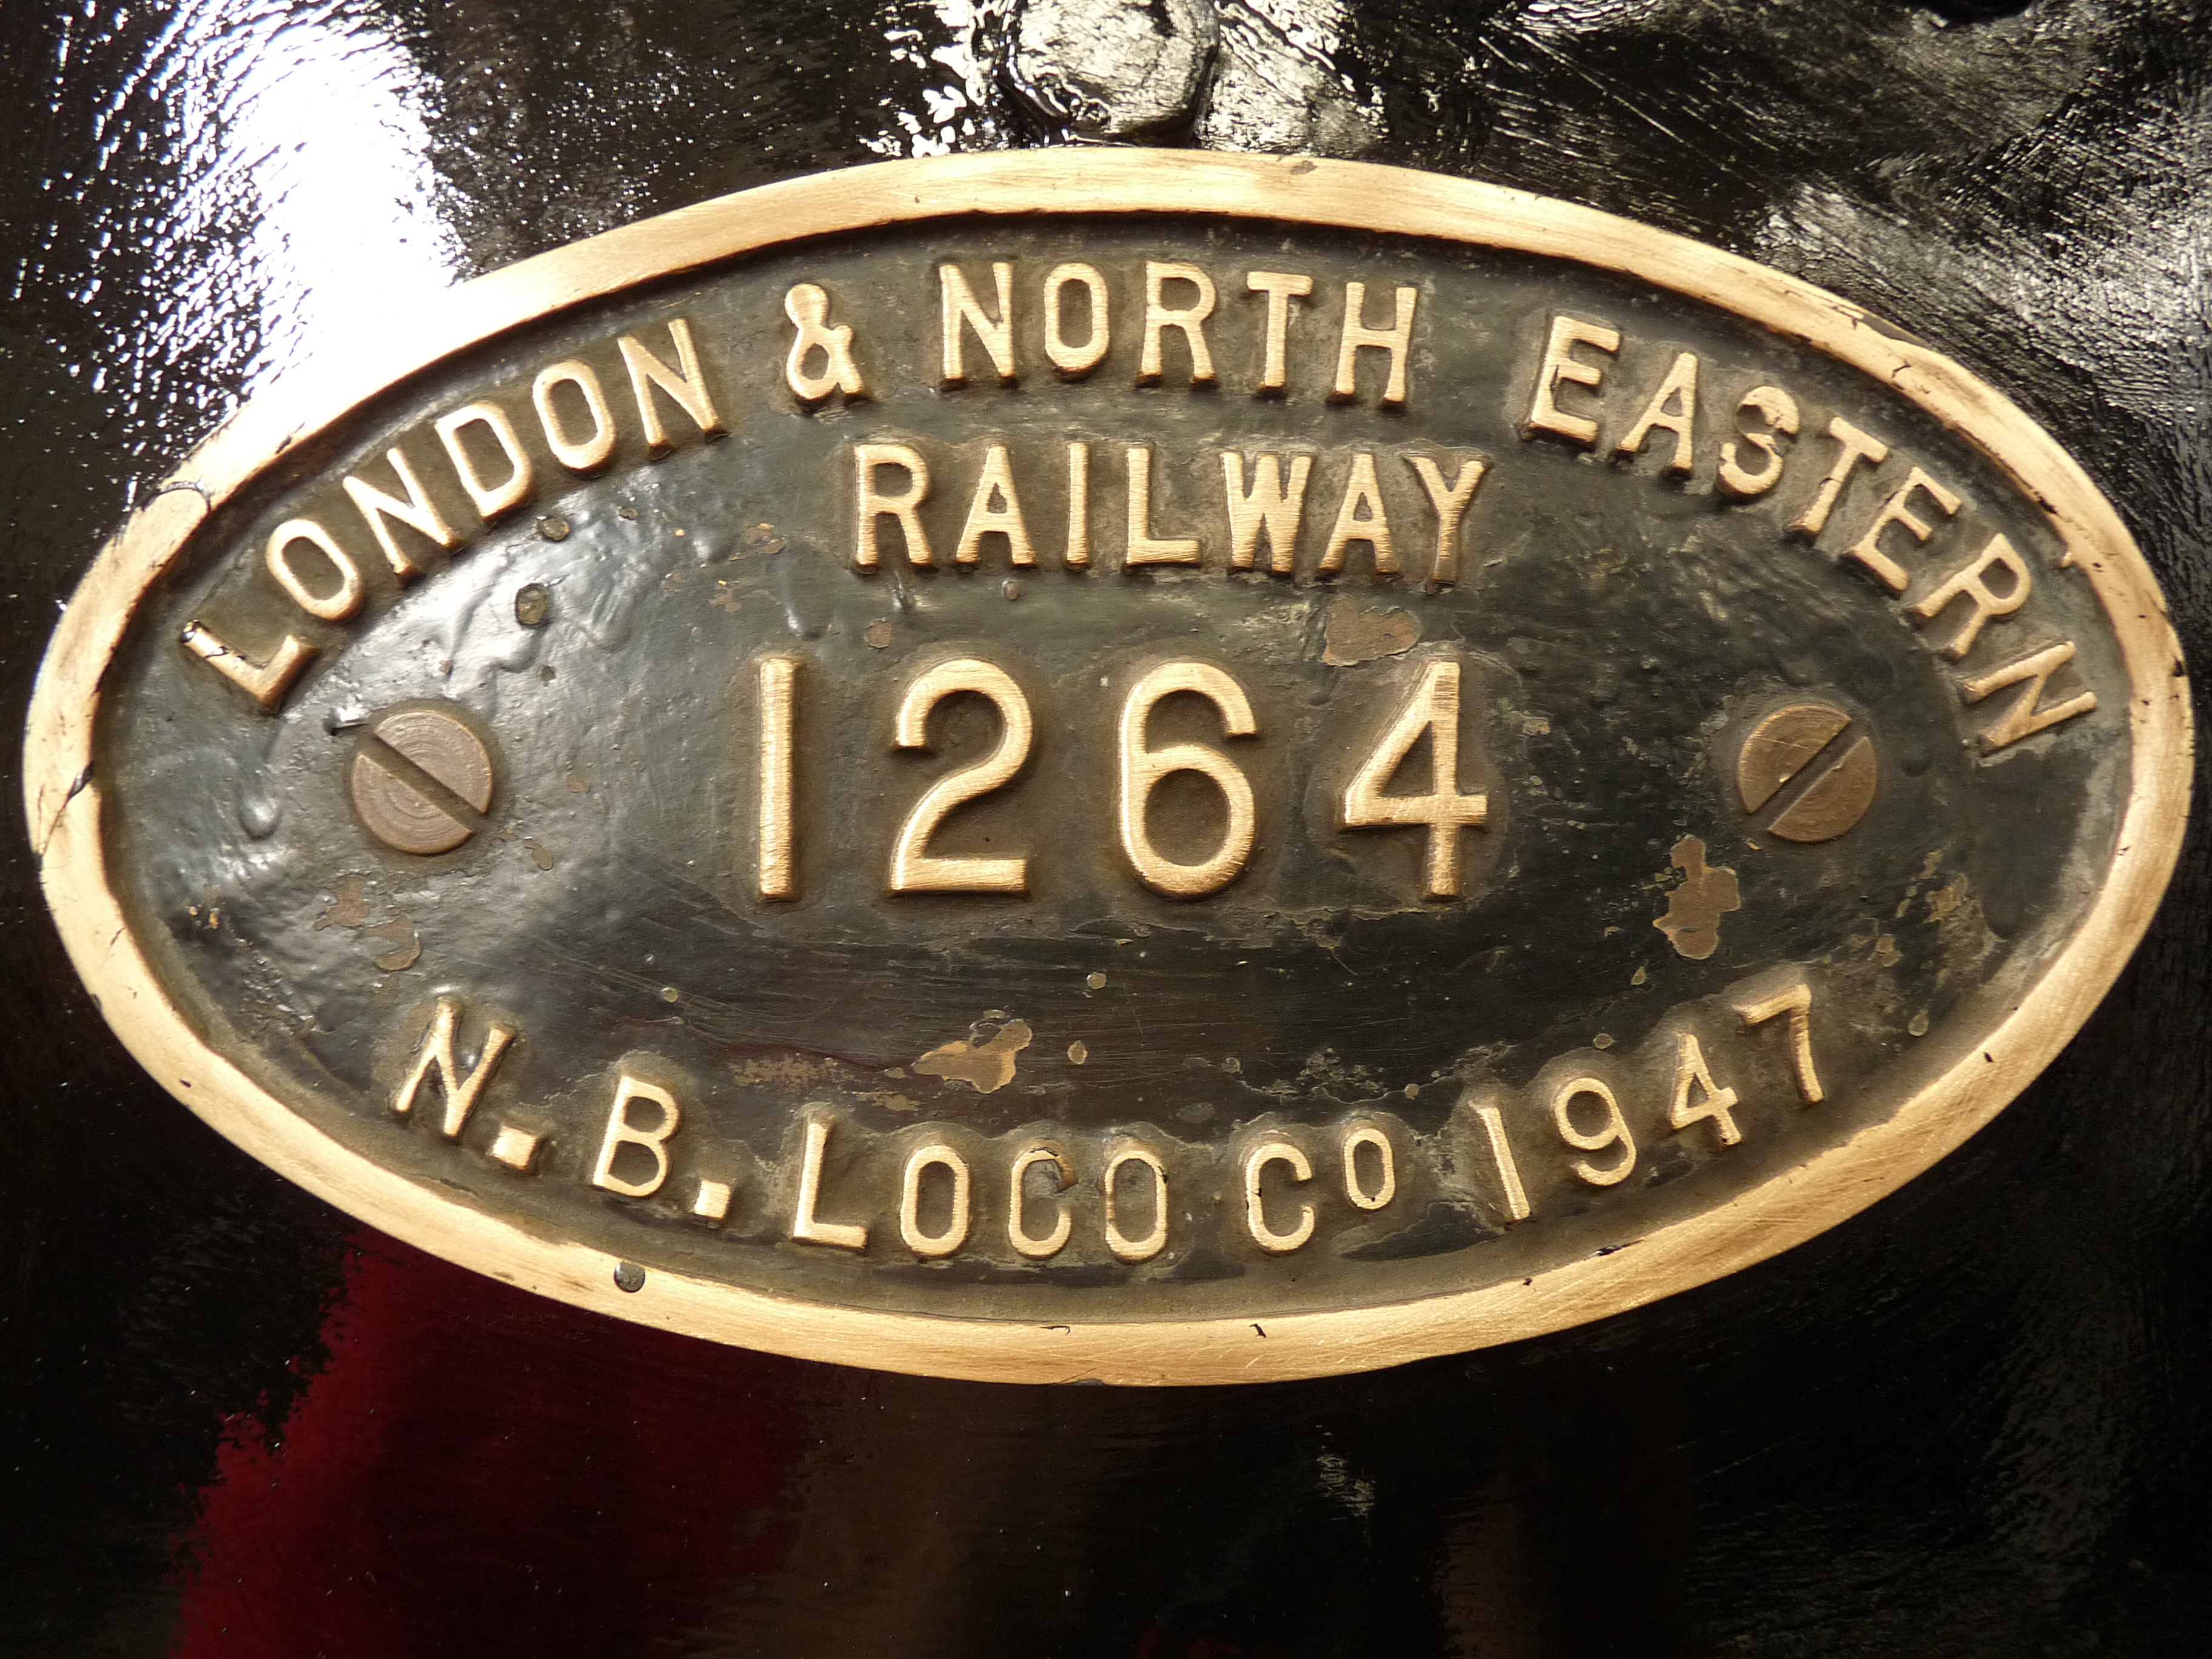 London_and_North_Eastern_Railway_%28LNER%29_Thompson_Class_B1_no.1264%2C_Manufacture_plate_%286133417630%29.jpg